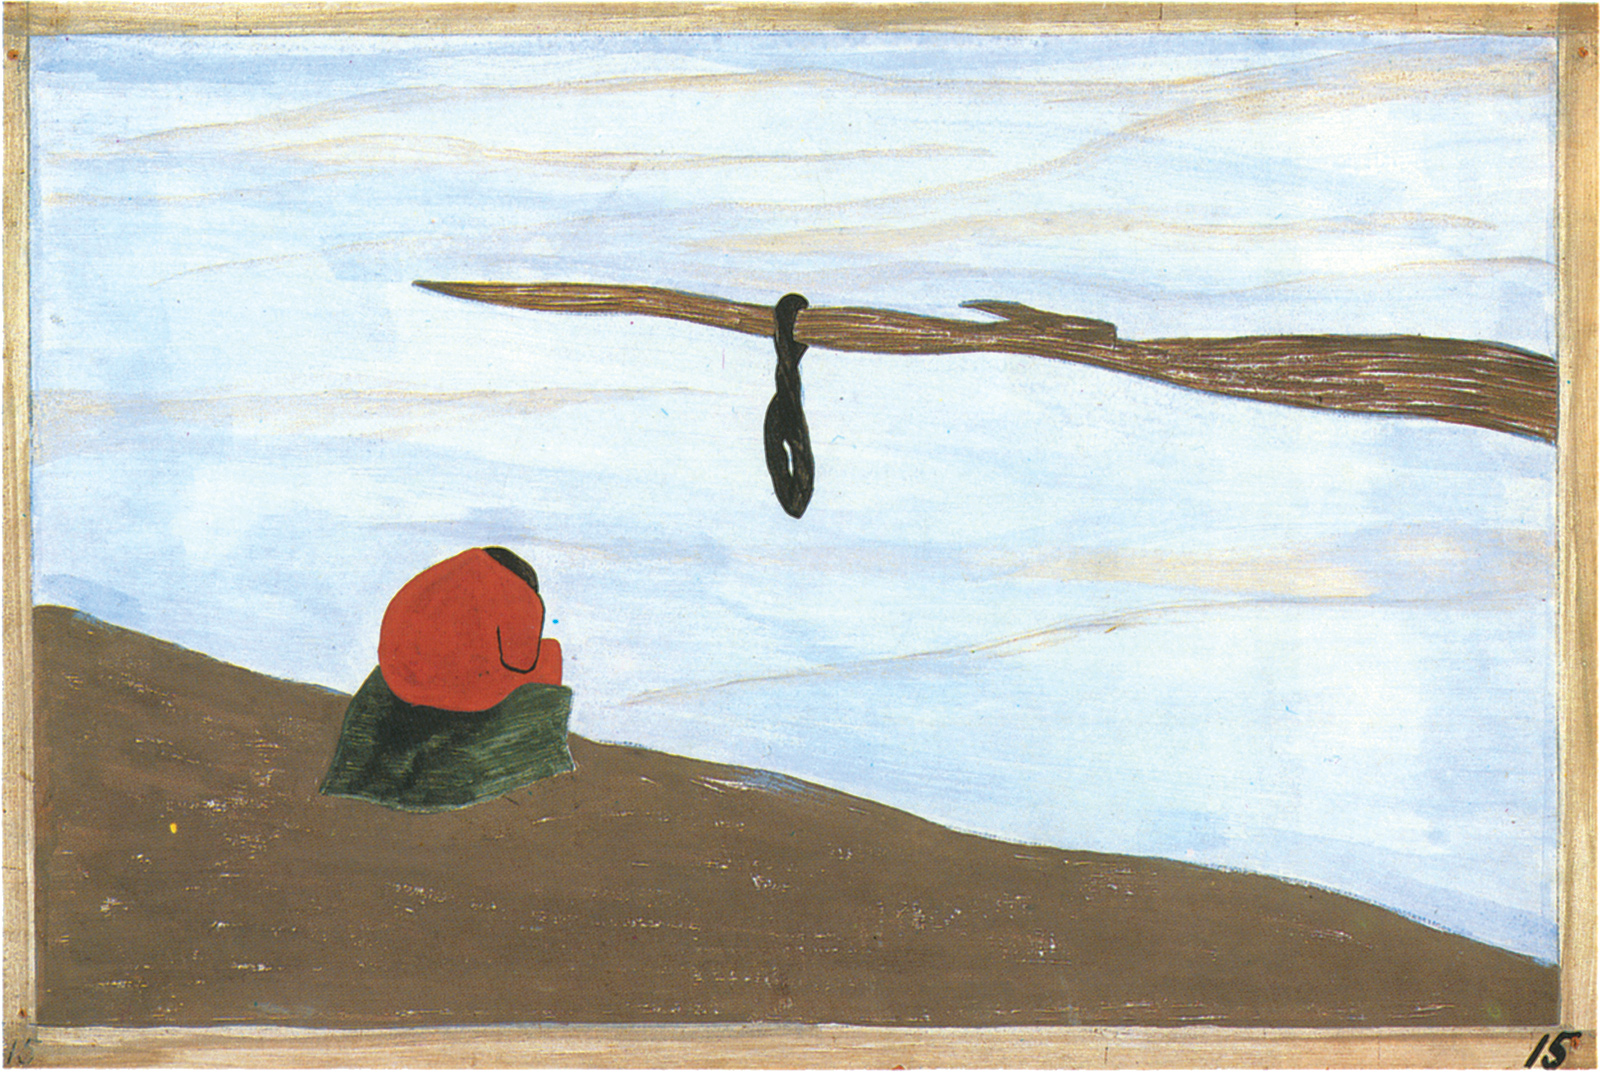 Jacob Lawrence: from the series The Migration of the Negro, 1940–1941